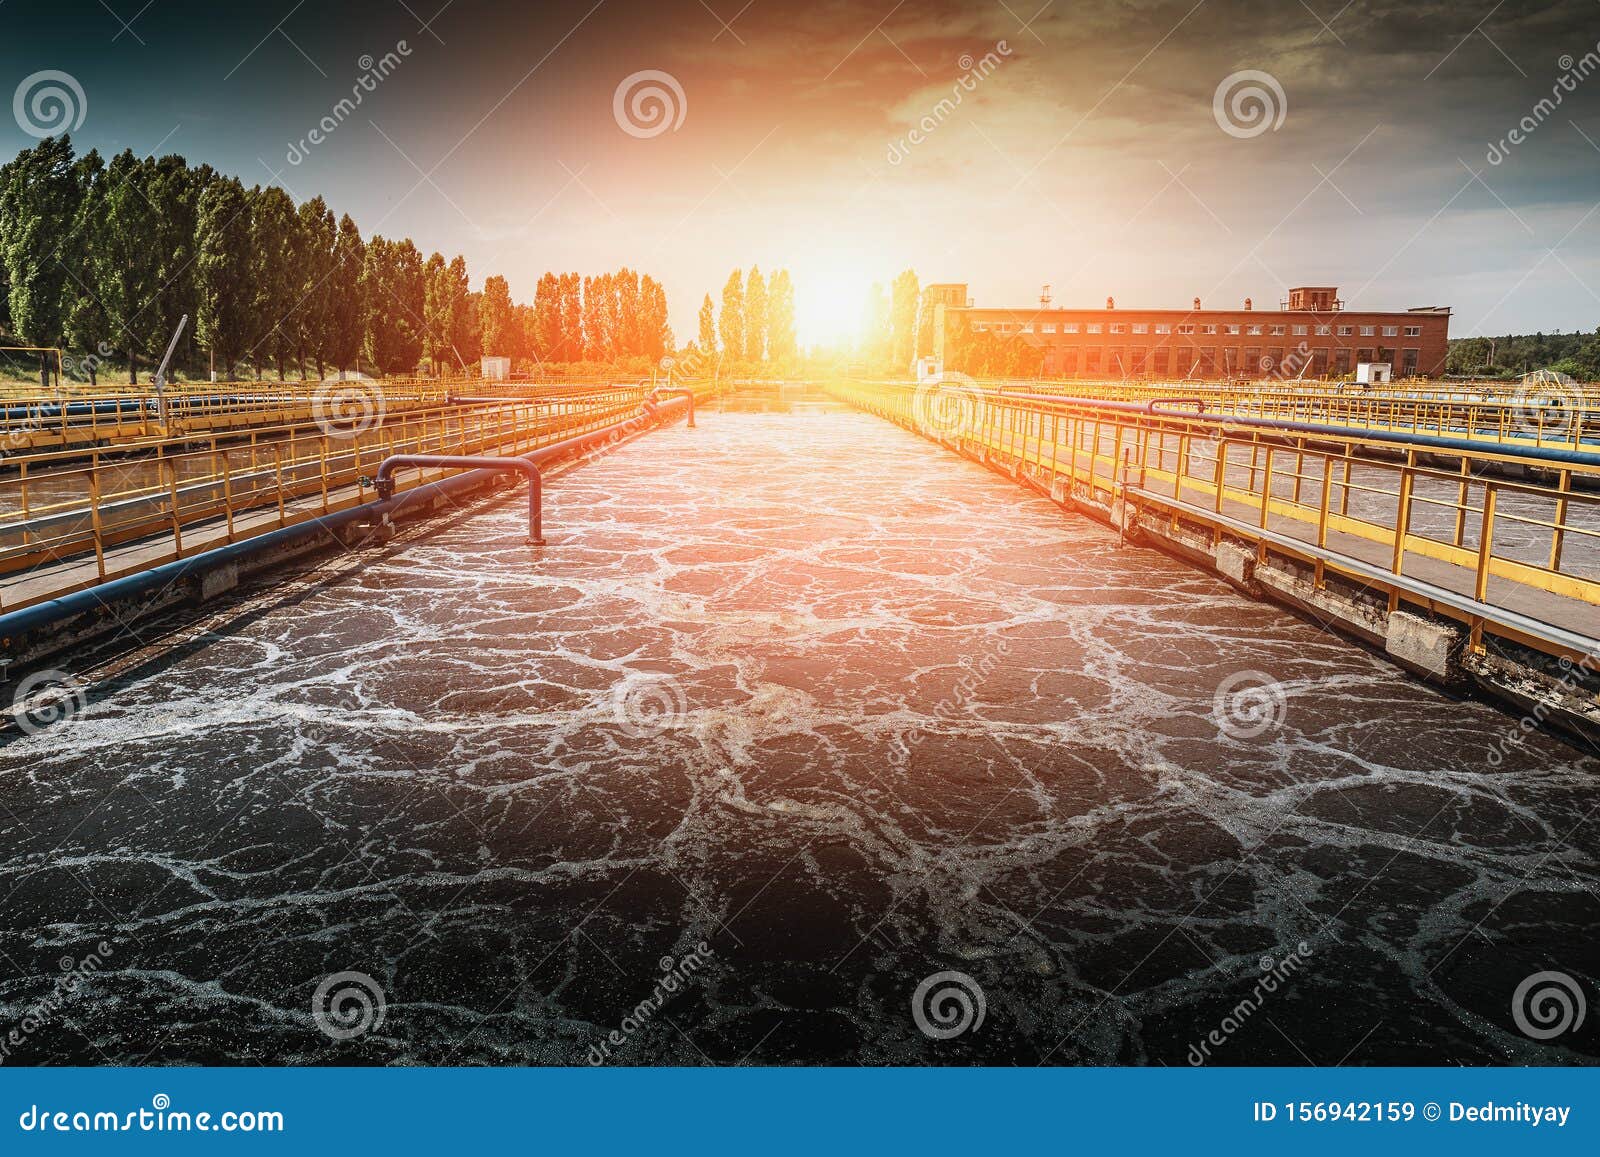 wastewater treatment plant at sunset. tanks for aeration and cleaning of sewage mass